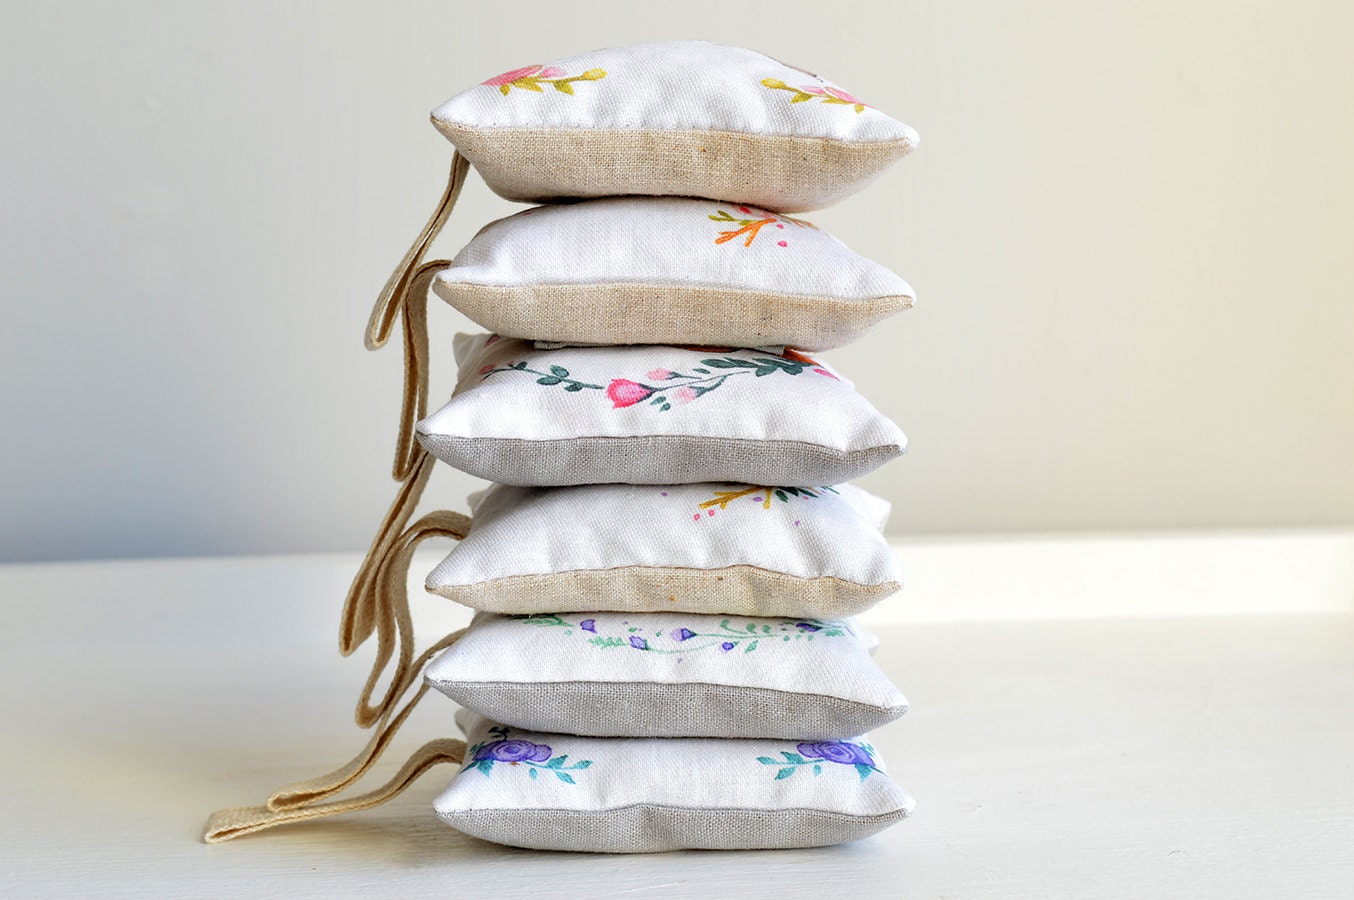 Set of 6 Lavender & Rose Drawer Sachets Scented Pillows